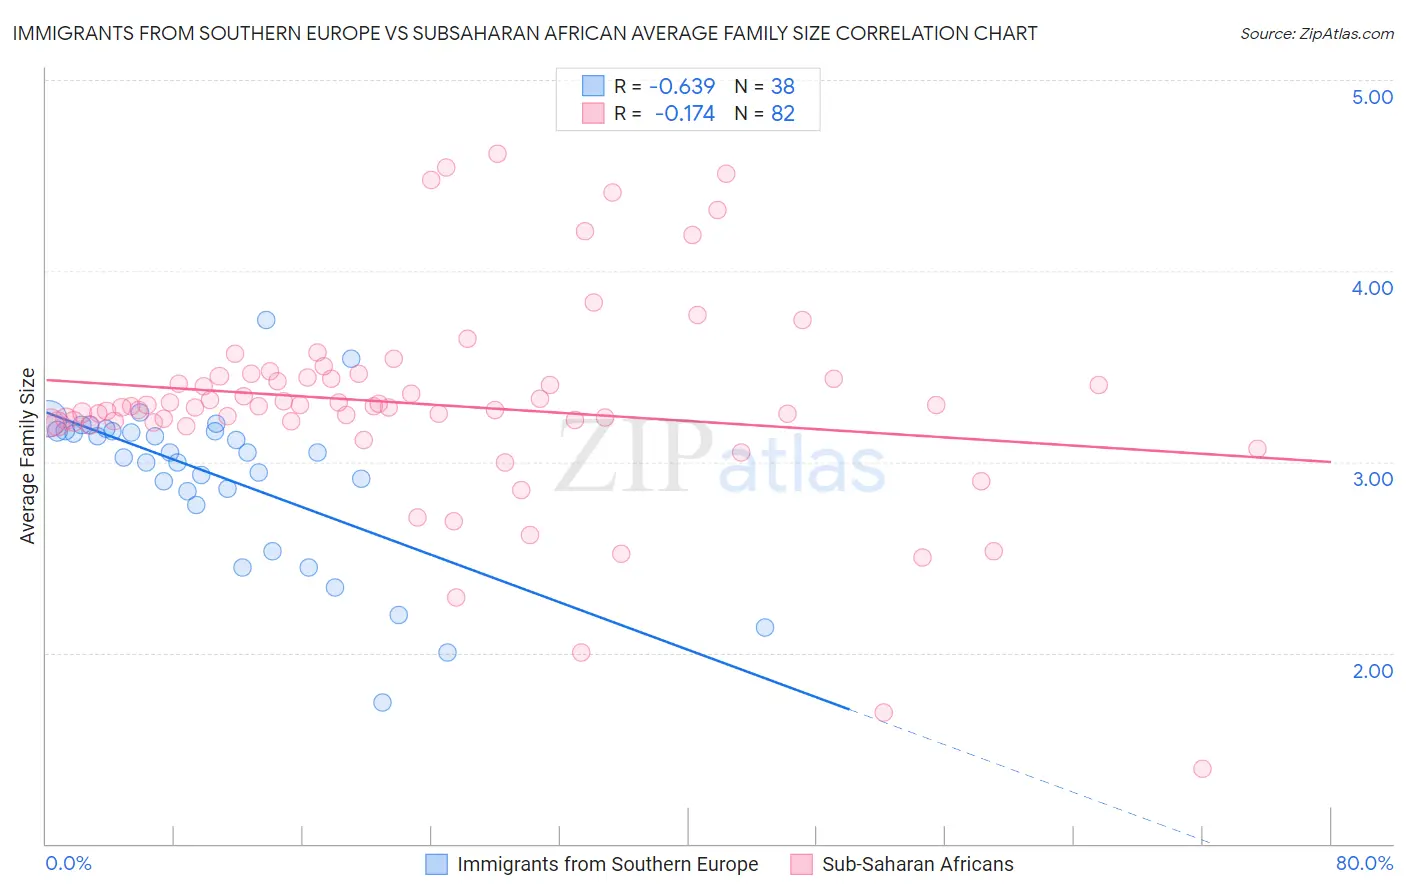 Immigrants from Southern Europe vs Subsaharan African Average Family Size